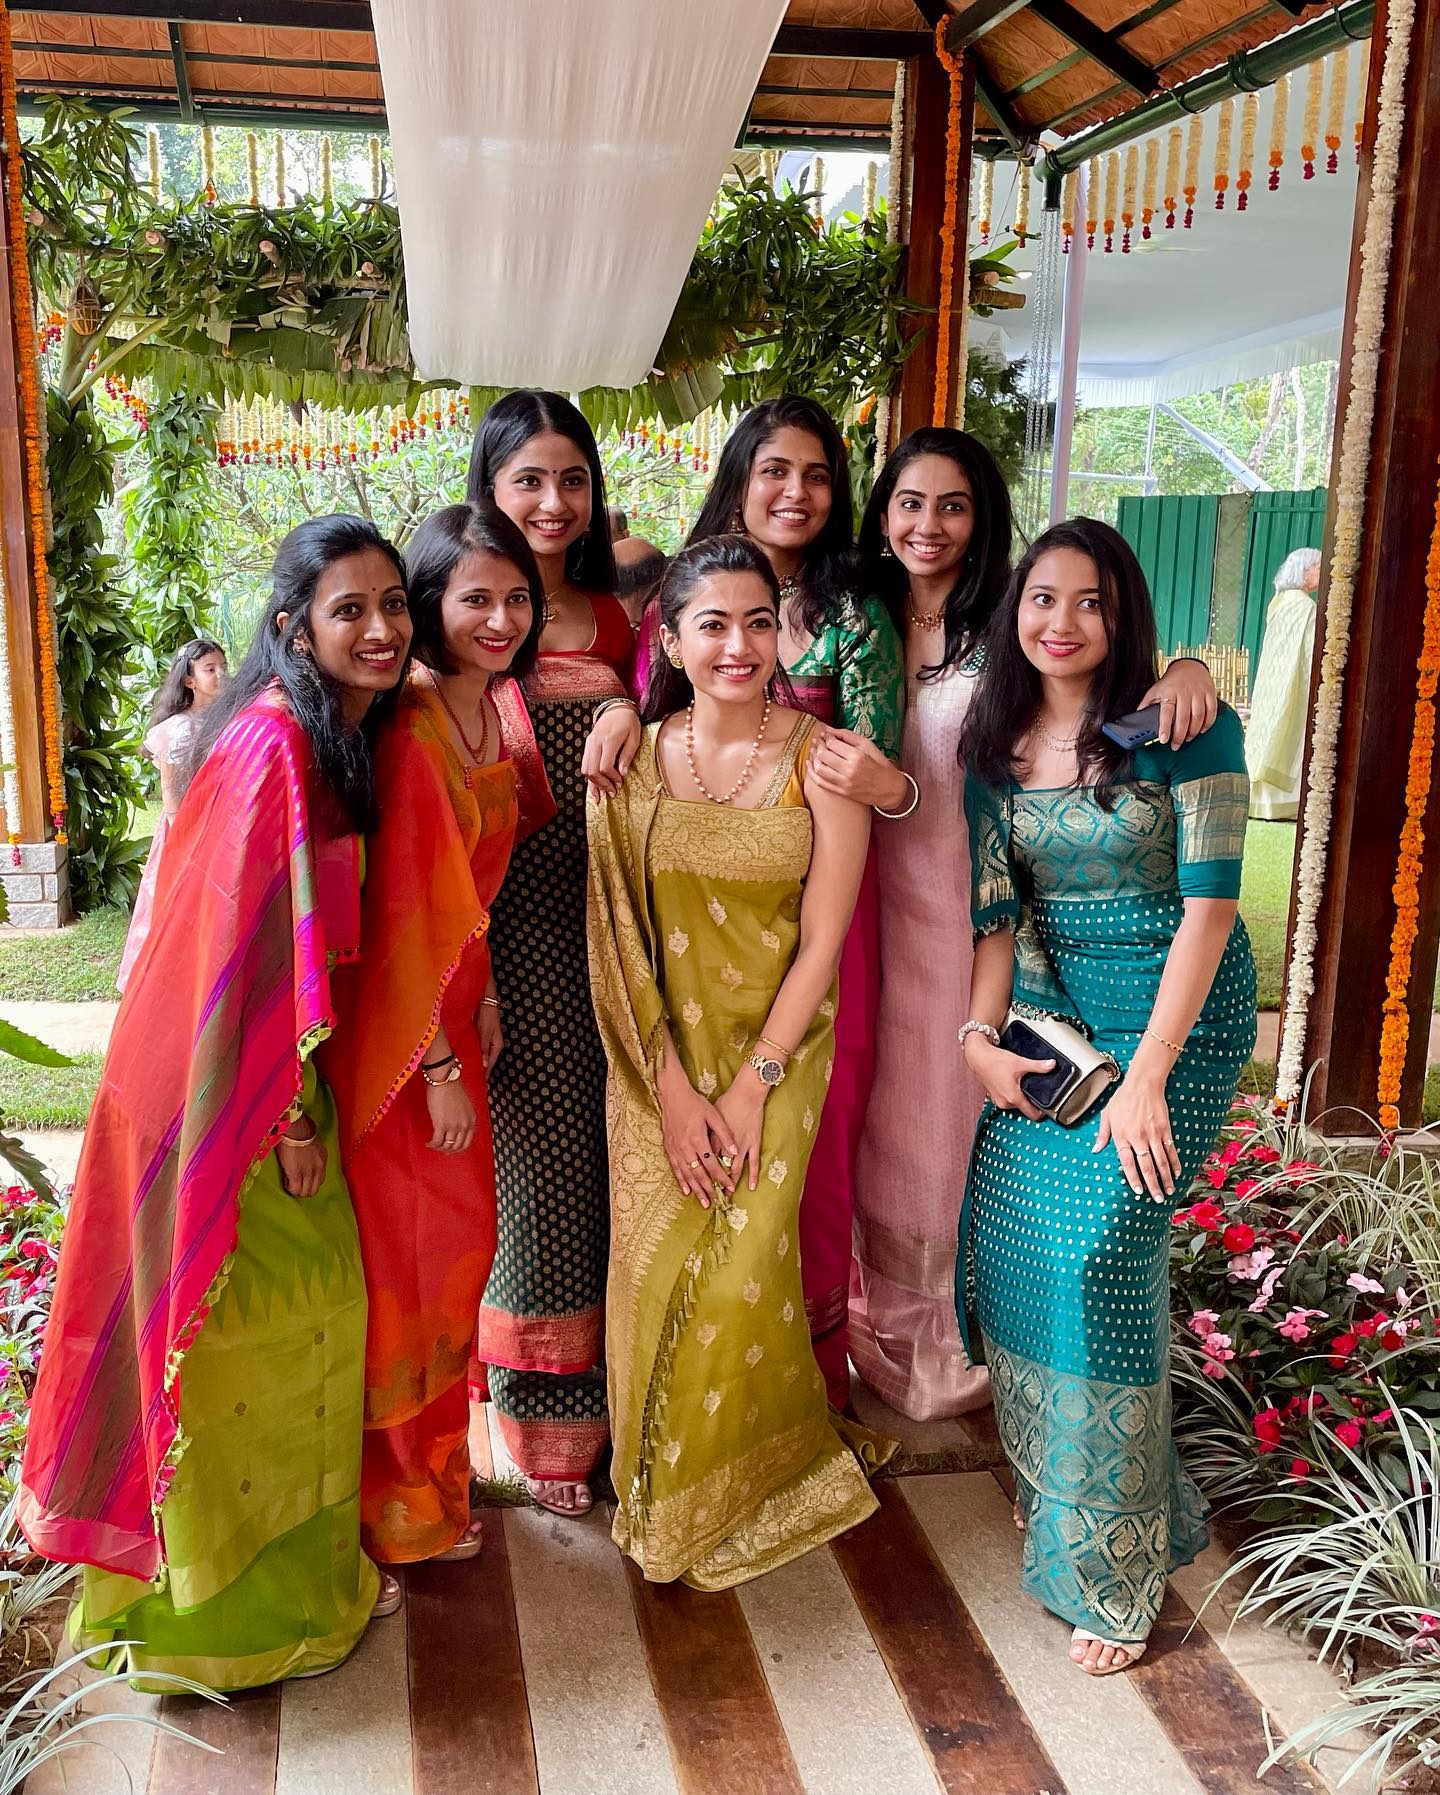 280866154 1438298056628240 785859448571224270 n Rashmika Mandanna attended her best friend's wedding as a bridesmaid, 'National crush' robbed the gathering in Kodava sari